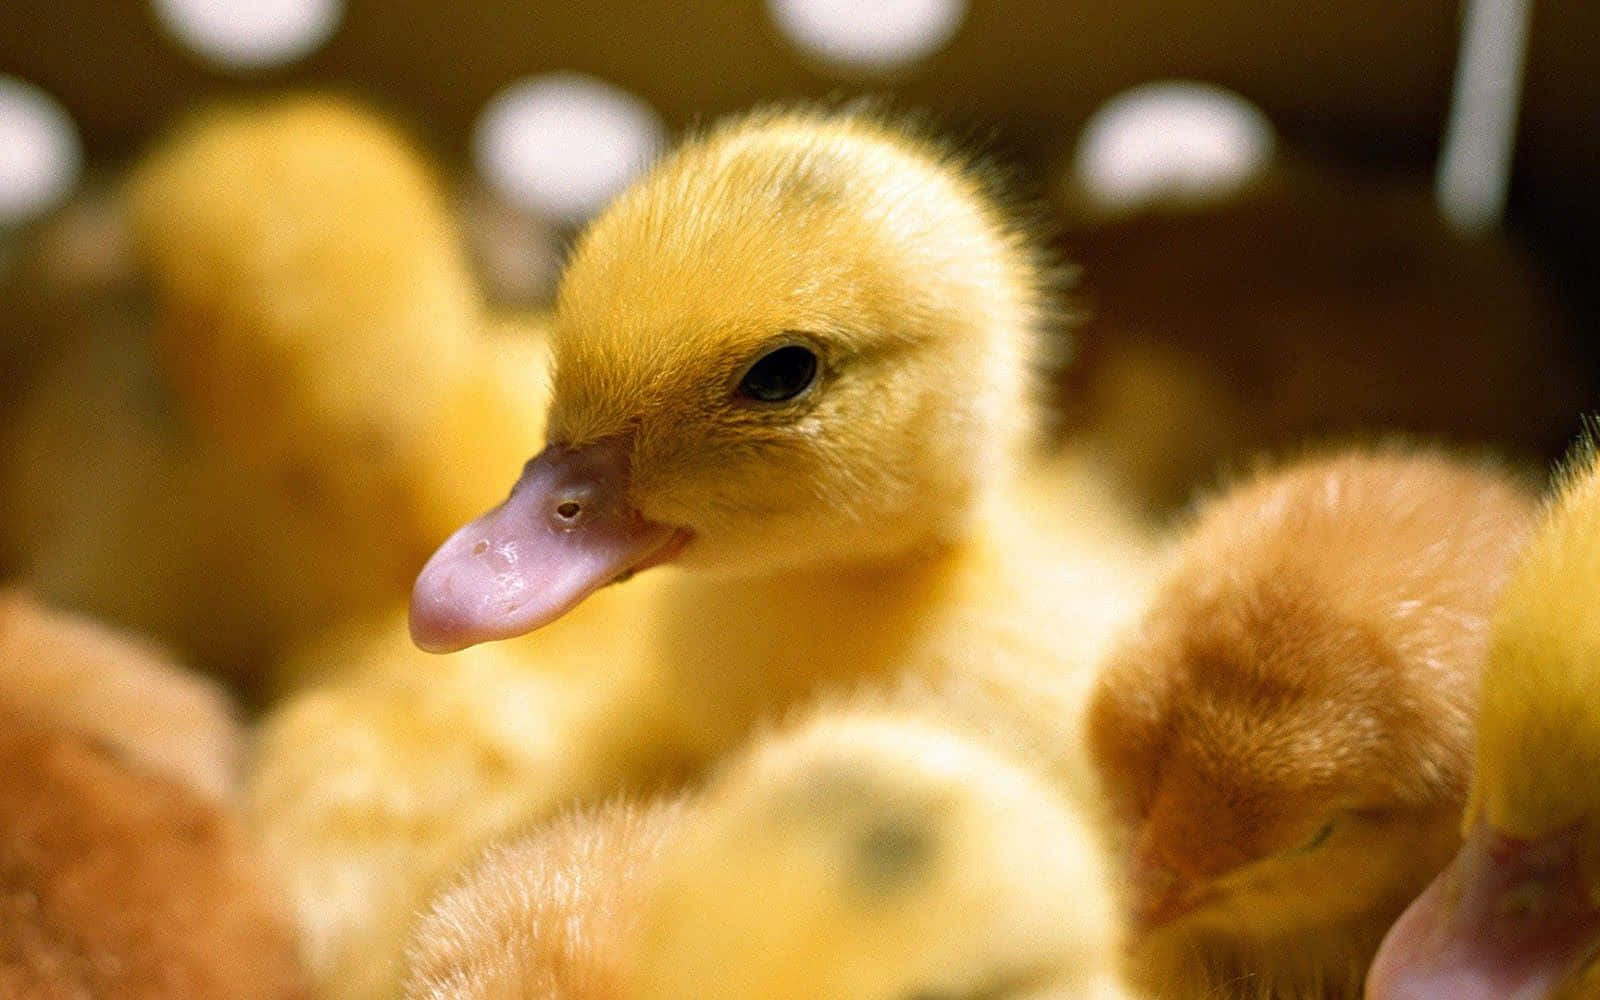 Who Can Resist The Cuteness Of This Adorable Duck?